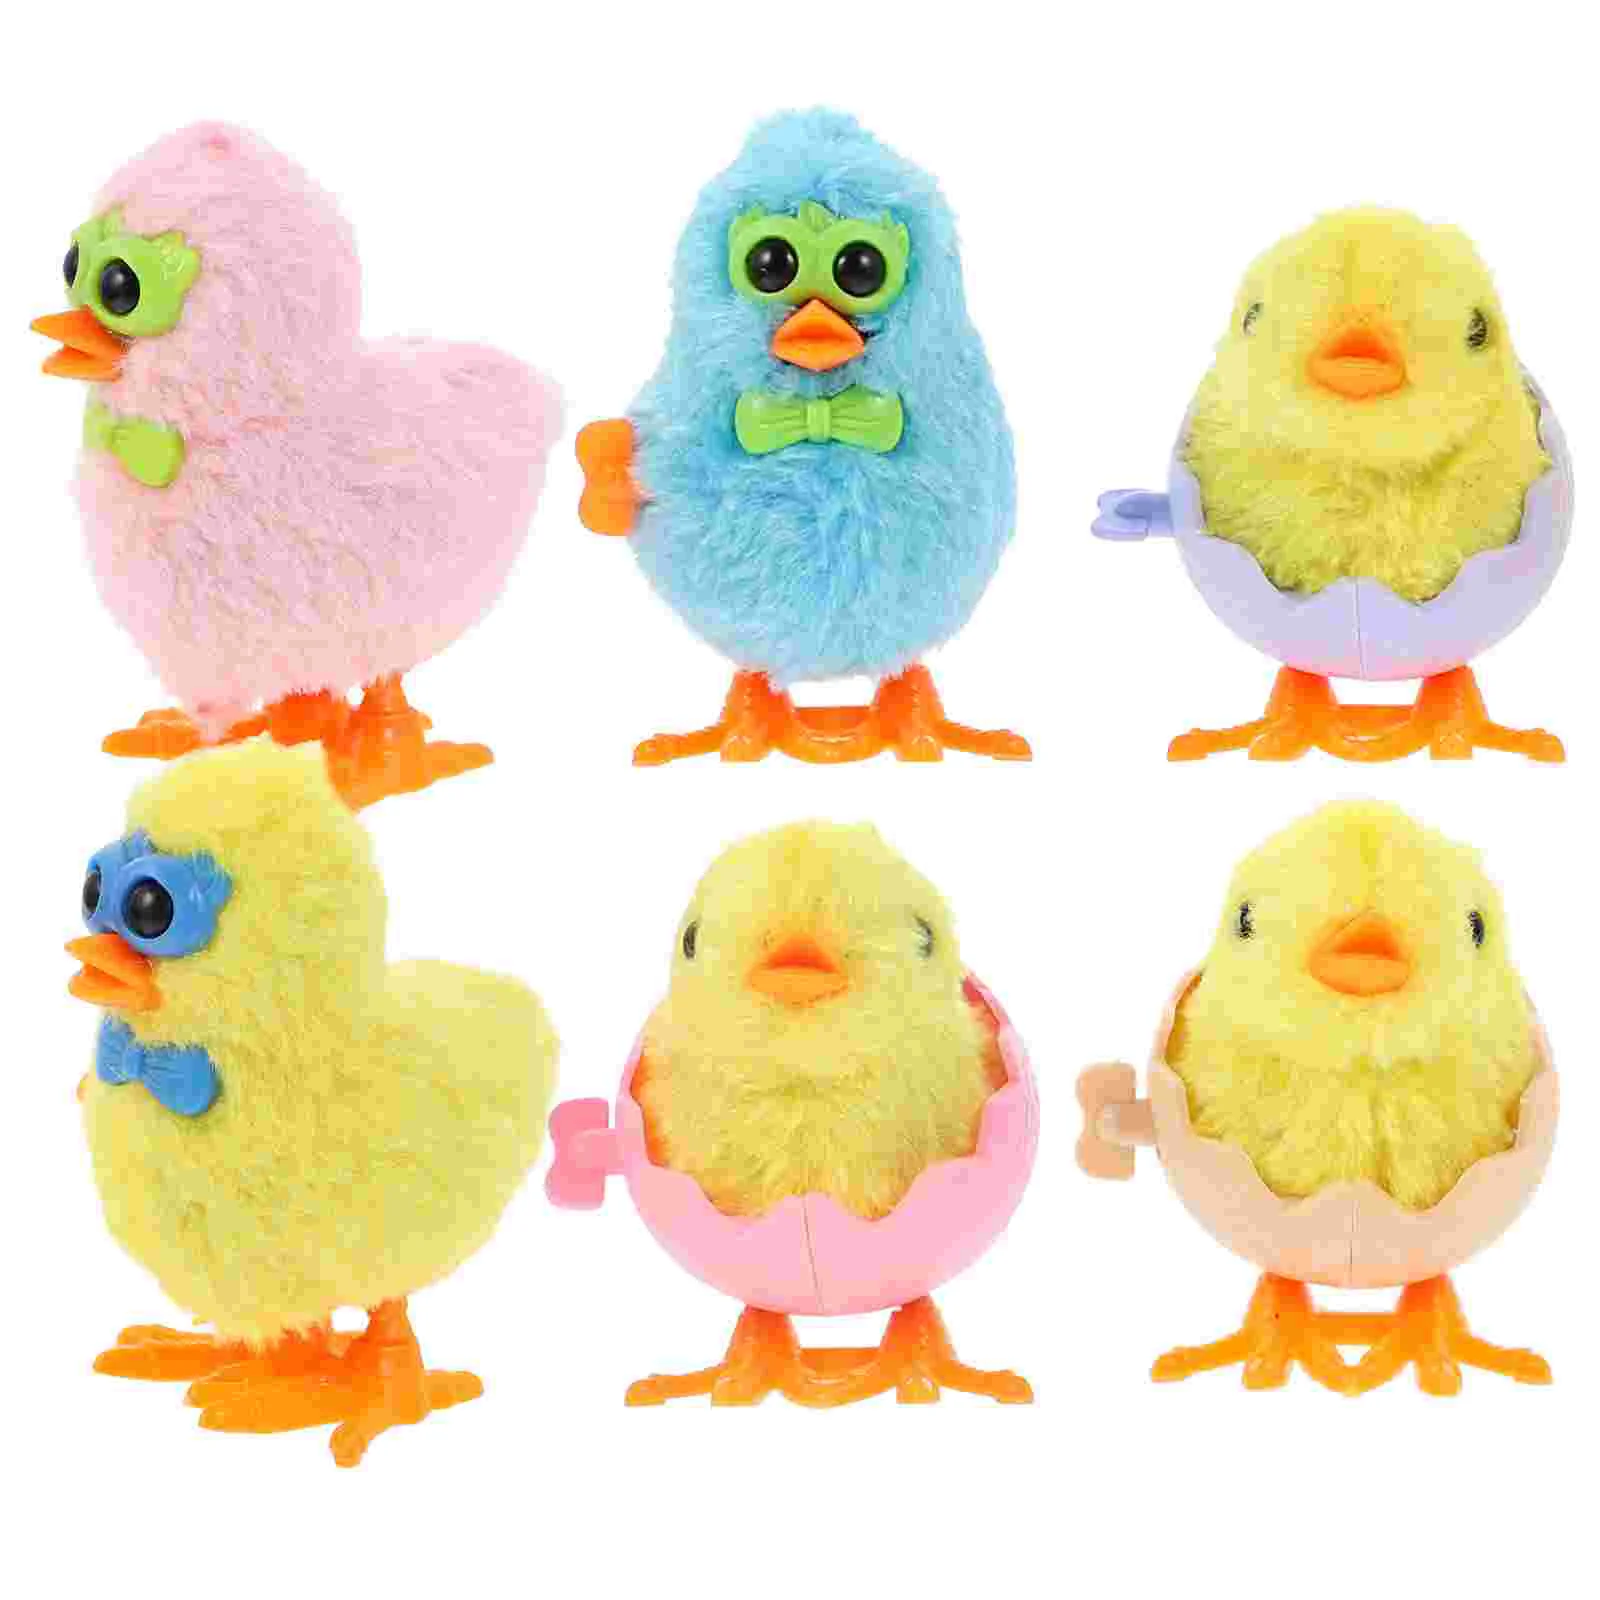 

Toys Wind Up Toy Chicken Kids Fillers Plush Easter Windup Favor Classroom Prizes Walking Gift Eggs Jumping Baby Chick Dancing